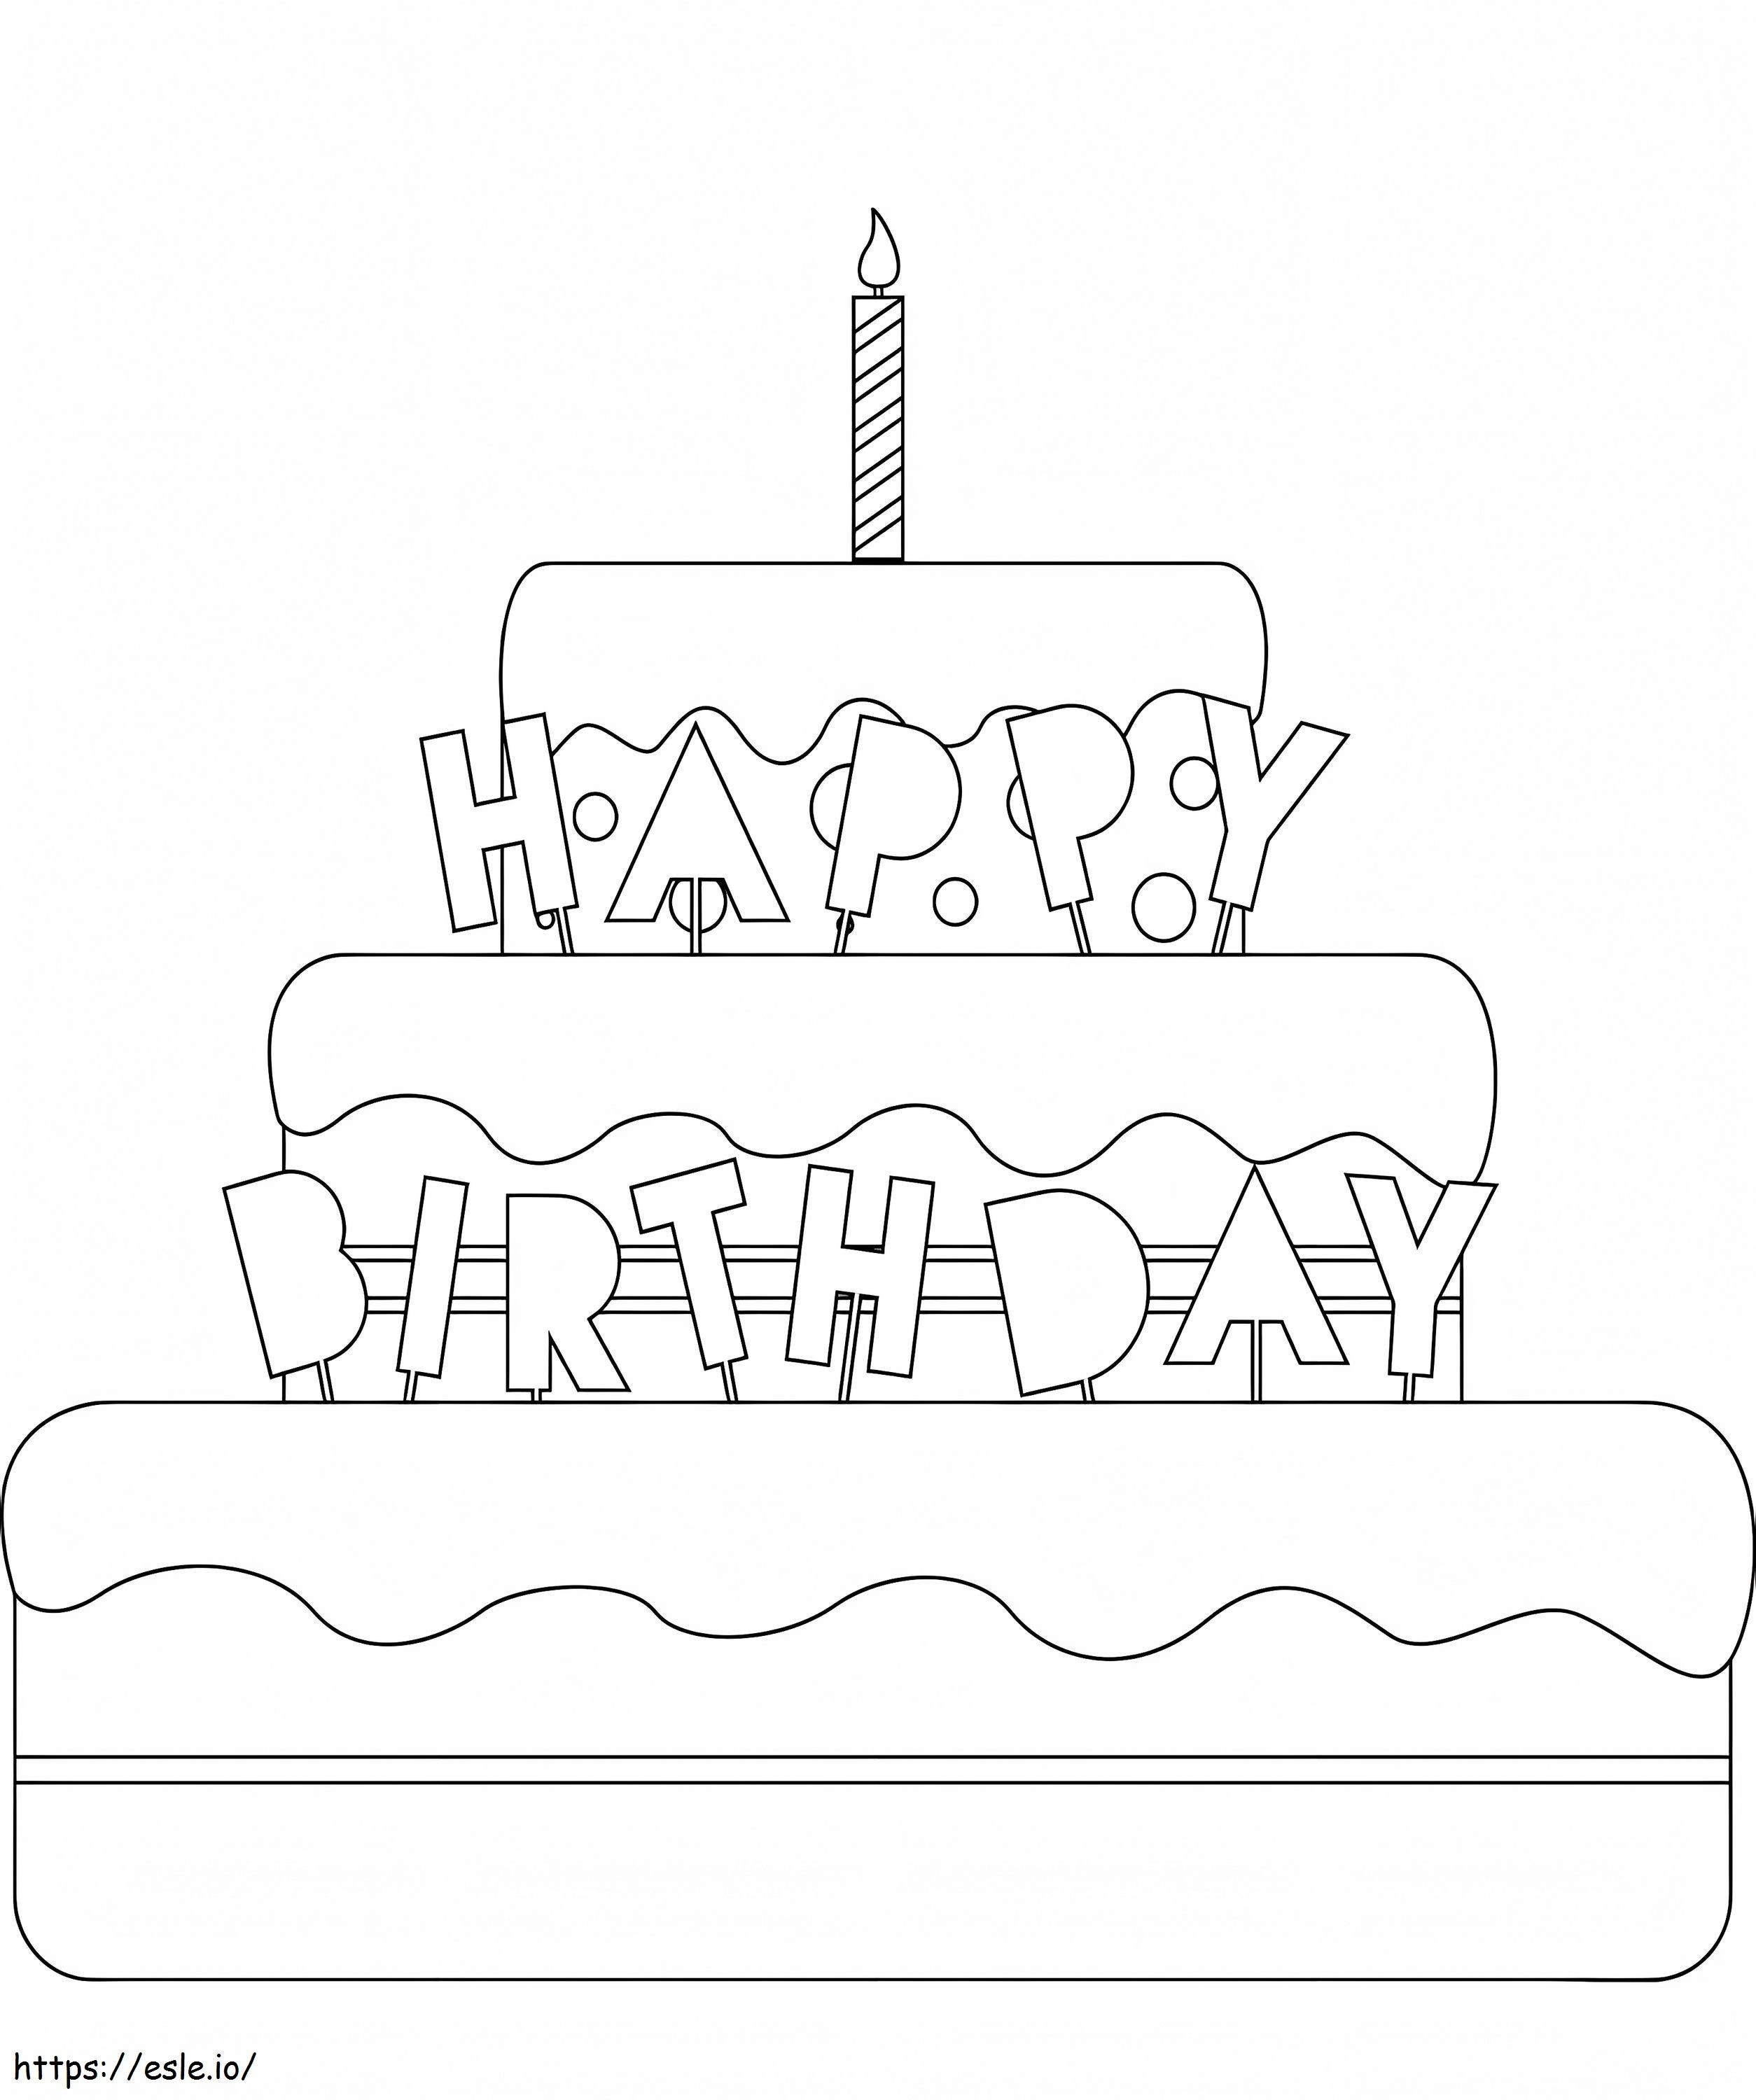 1585966238 Happy Birthday Cake coloring page